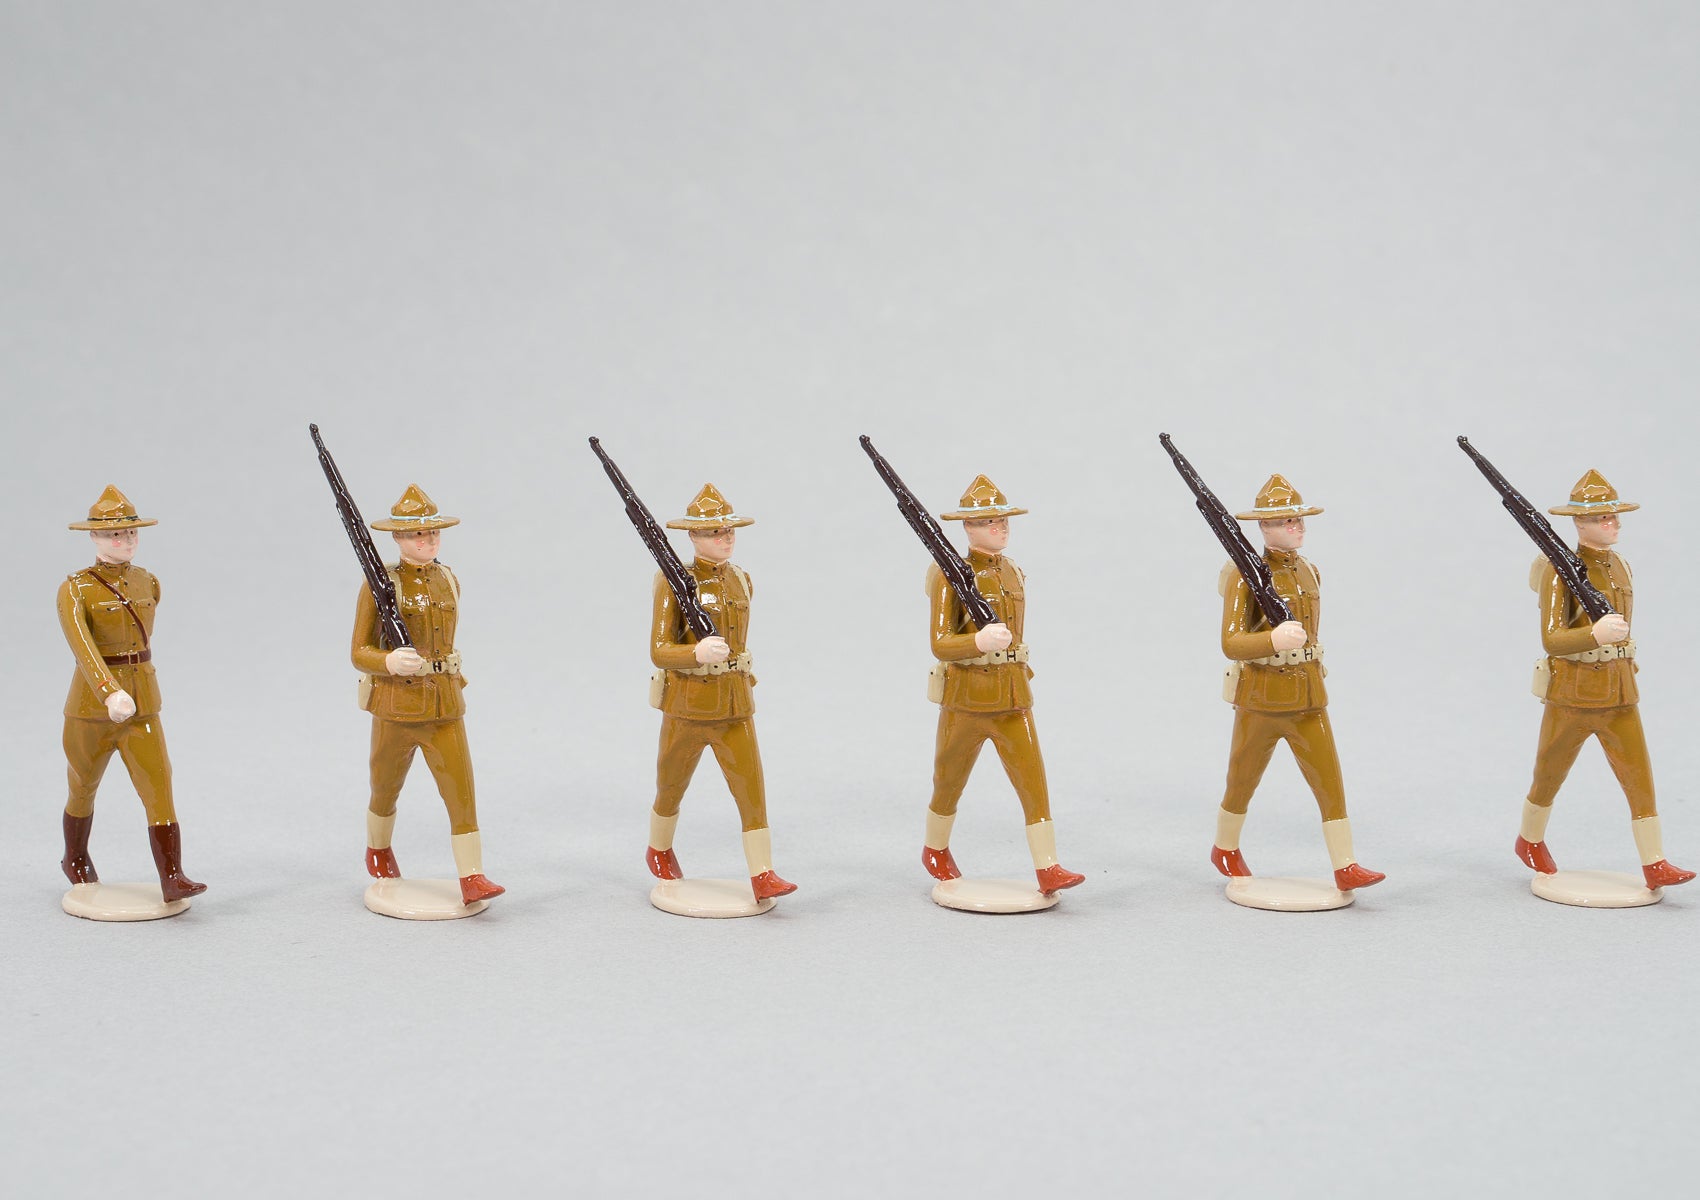 155 US 16th Infantry Regiment "Doughboys", 1917